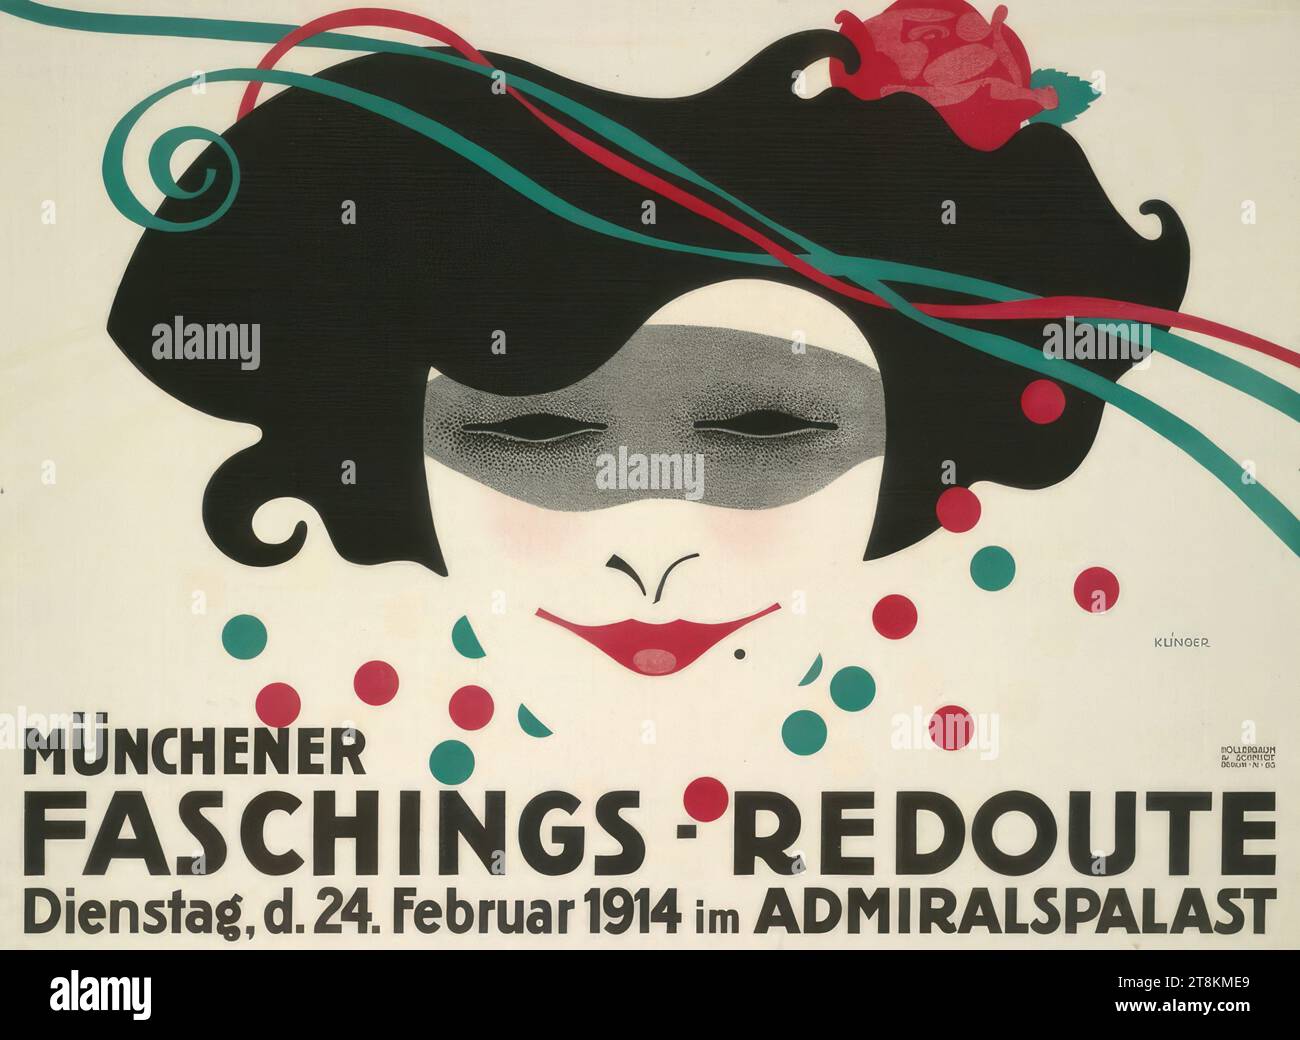 MUNICH CARNIVAL REDOUTE; 1914; IN THE ADMIRAL PALACE, Julius Klinger, Vienna 1876 - 1942, Deported to Minsk, 1914, print, color lithograph, sheet: 700 mm x 950 mm, Austria Stock Photo